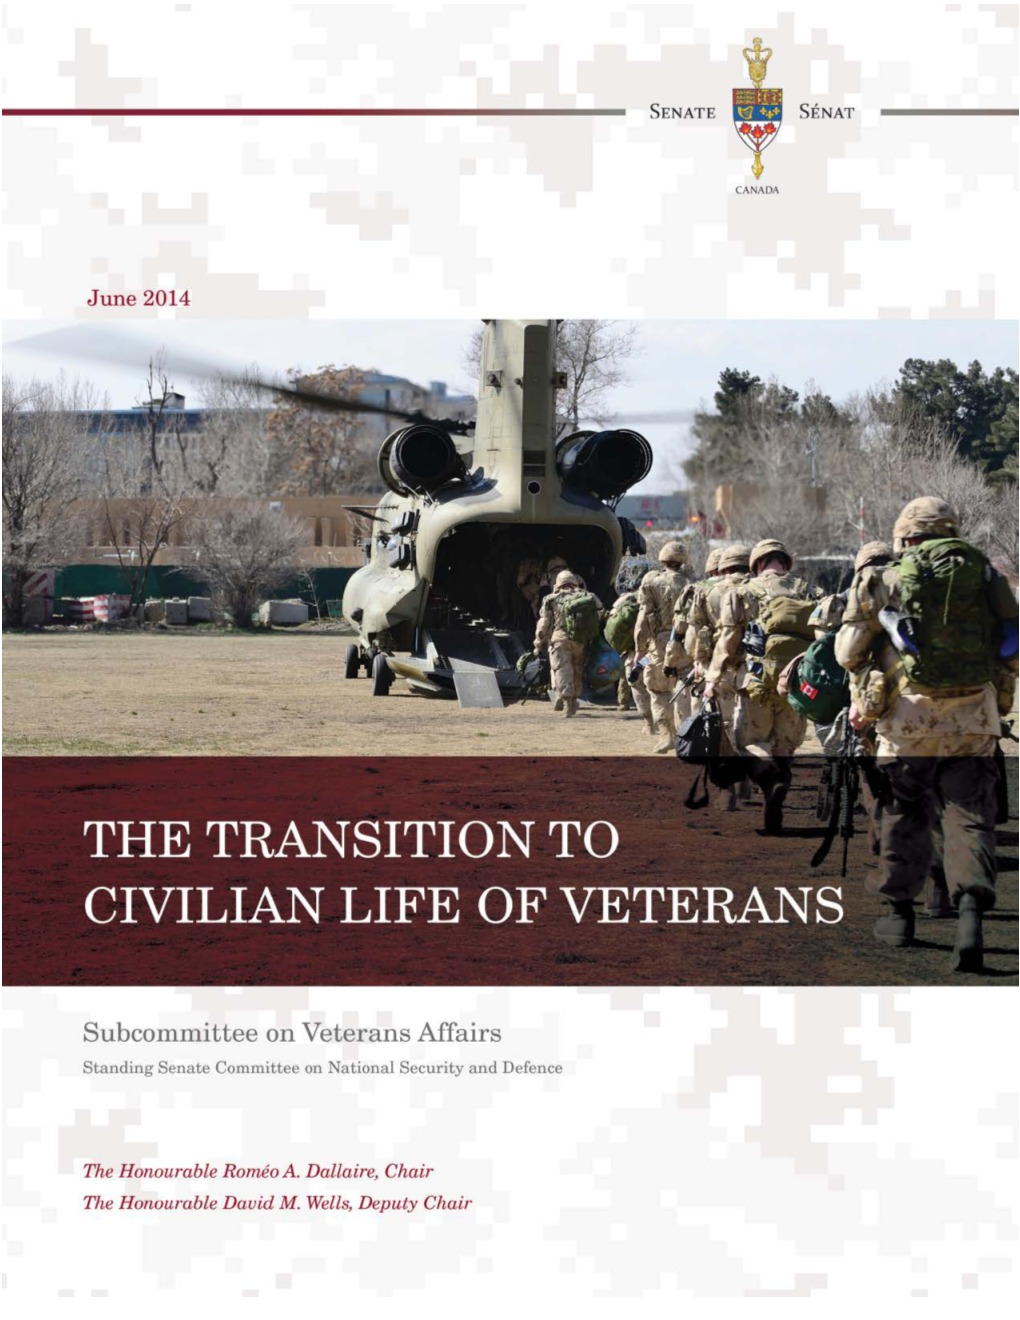 The Transition to Civilian Life of Veterans